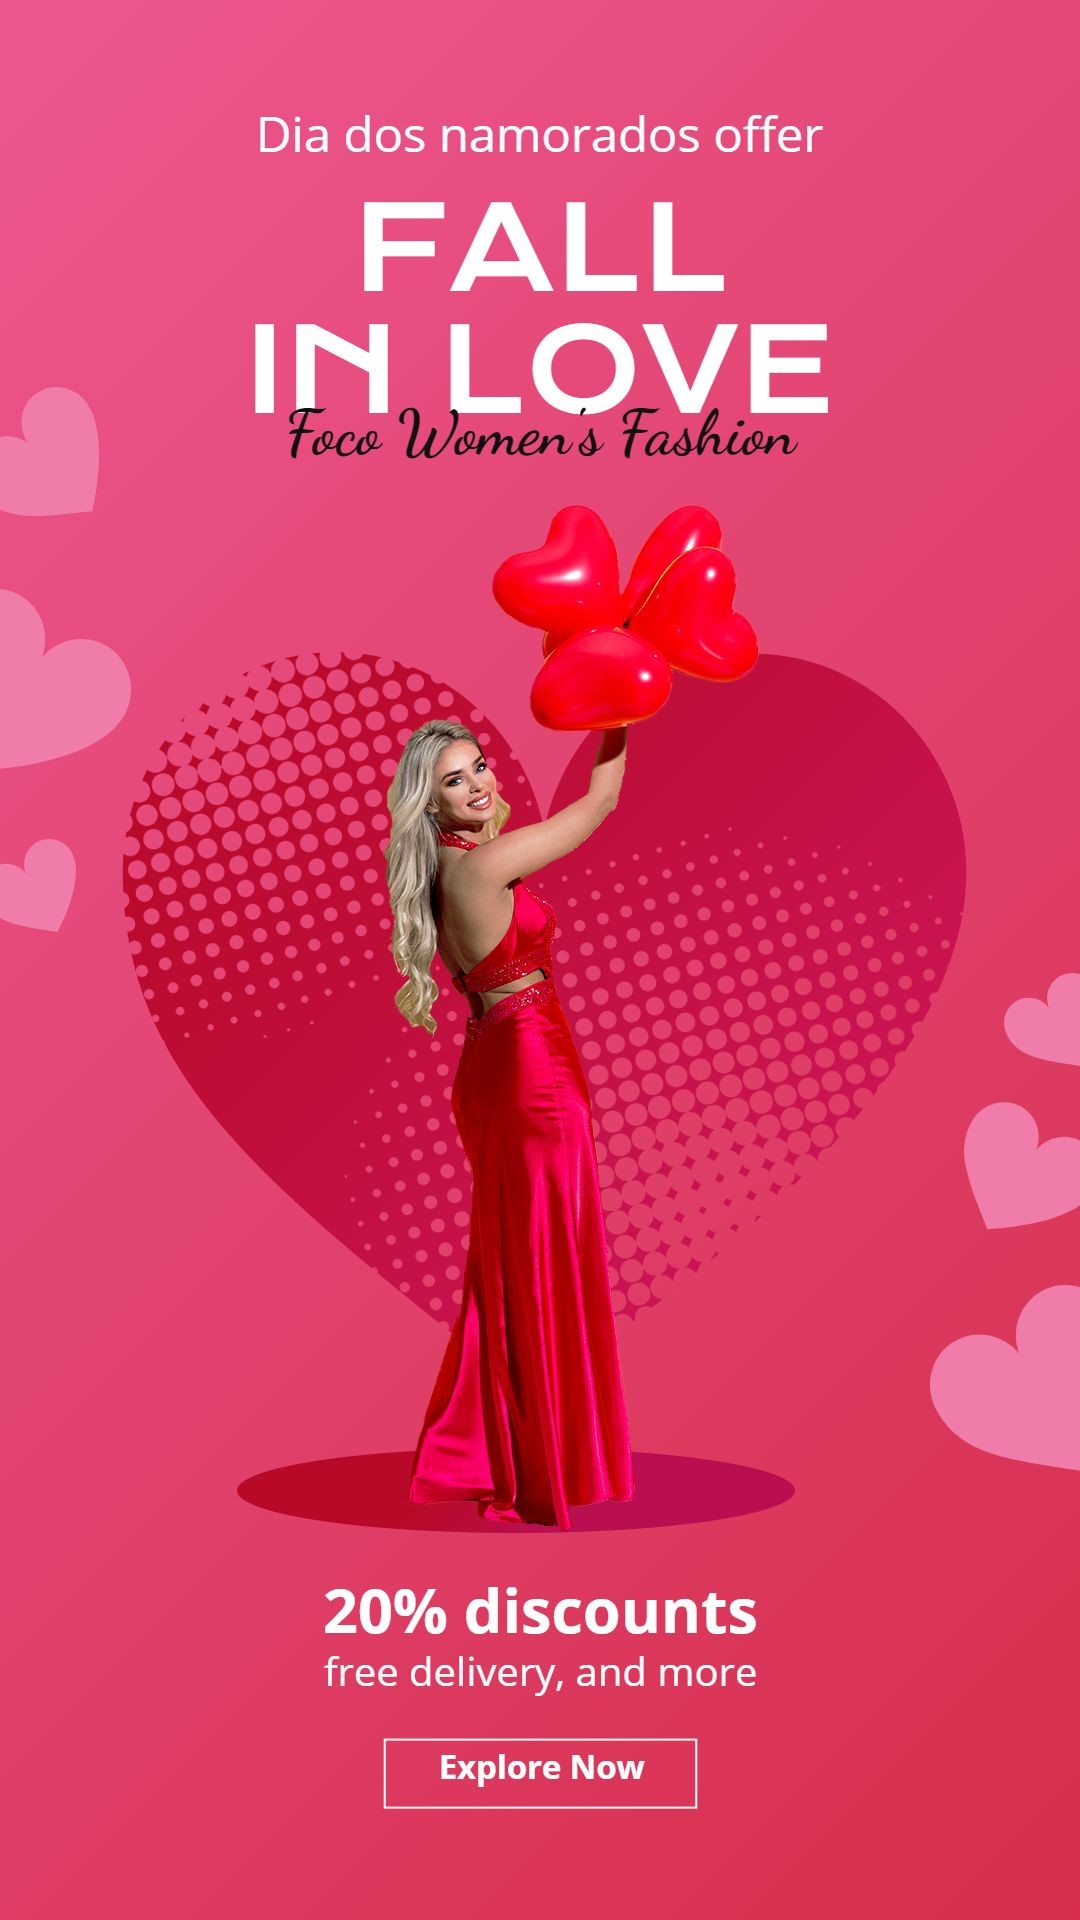 Pink Hearts Campaign Women's Fashion Dia dos namorados Discount Sale Promo Ecommerce Story预览效果